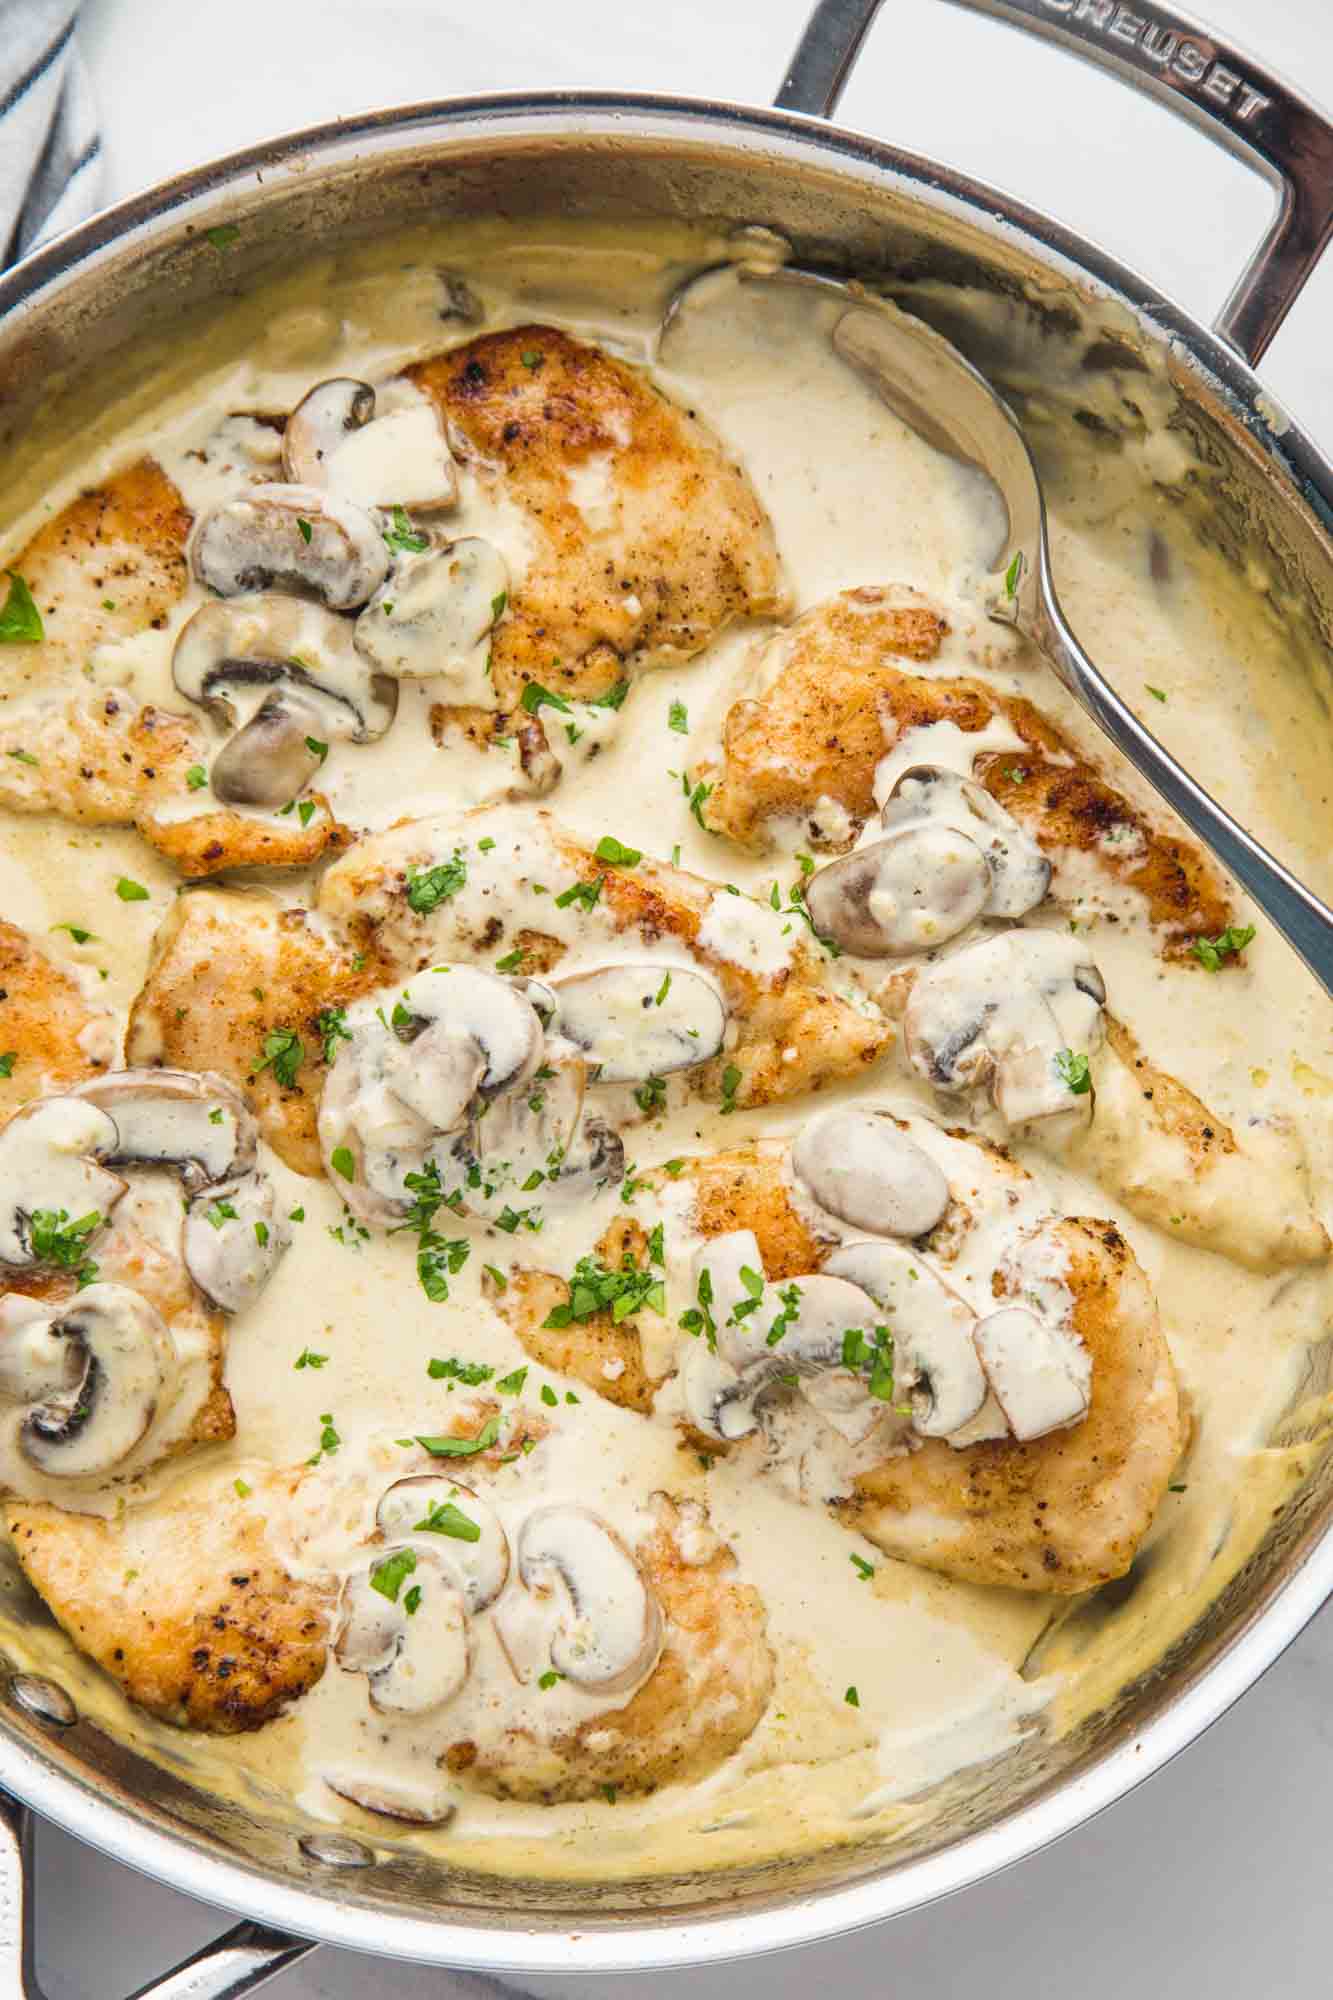 Creamy mushroom chicken in a skillet garnished with parsley in a stainless steel skillet